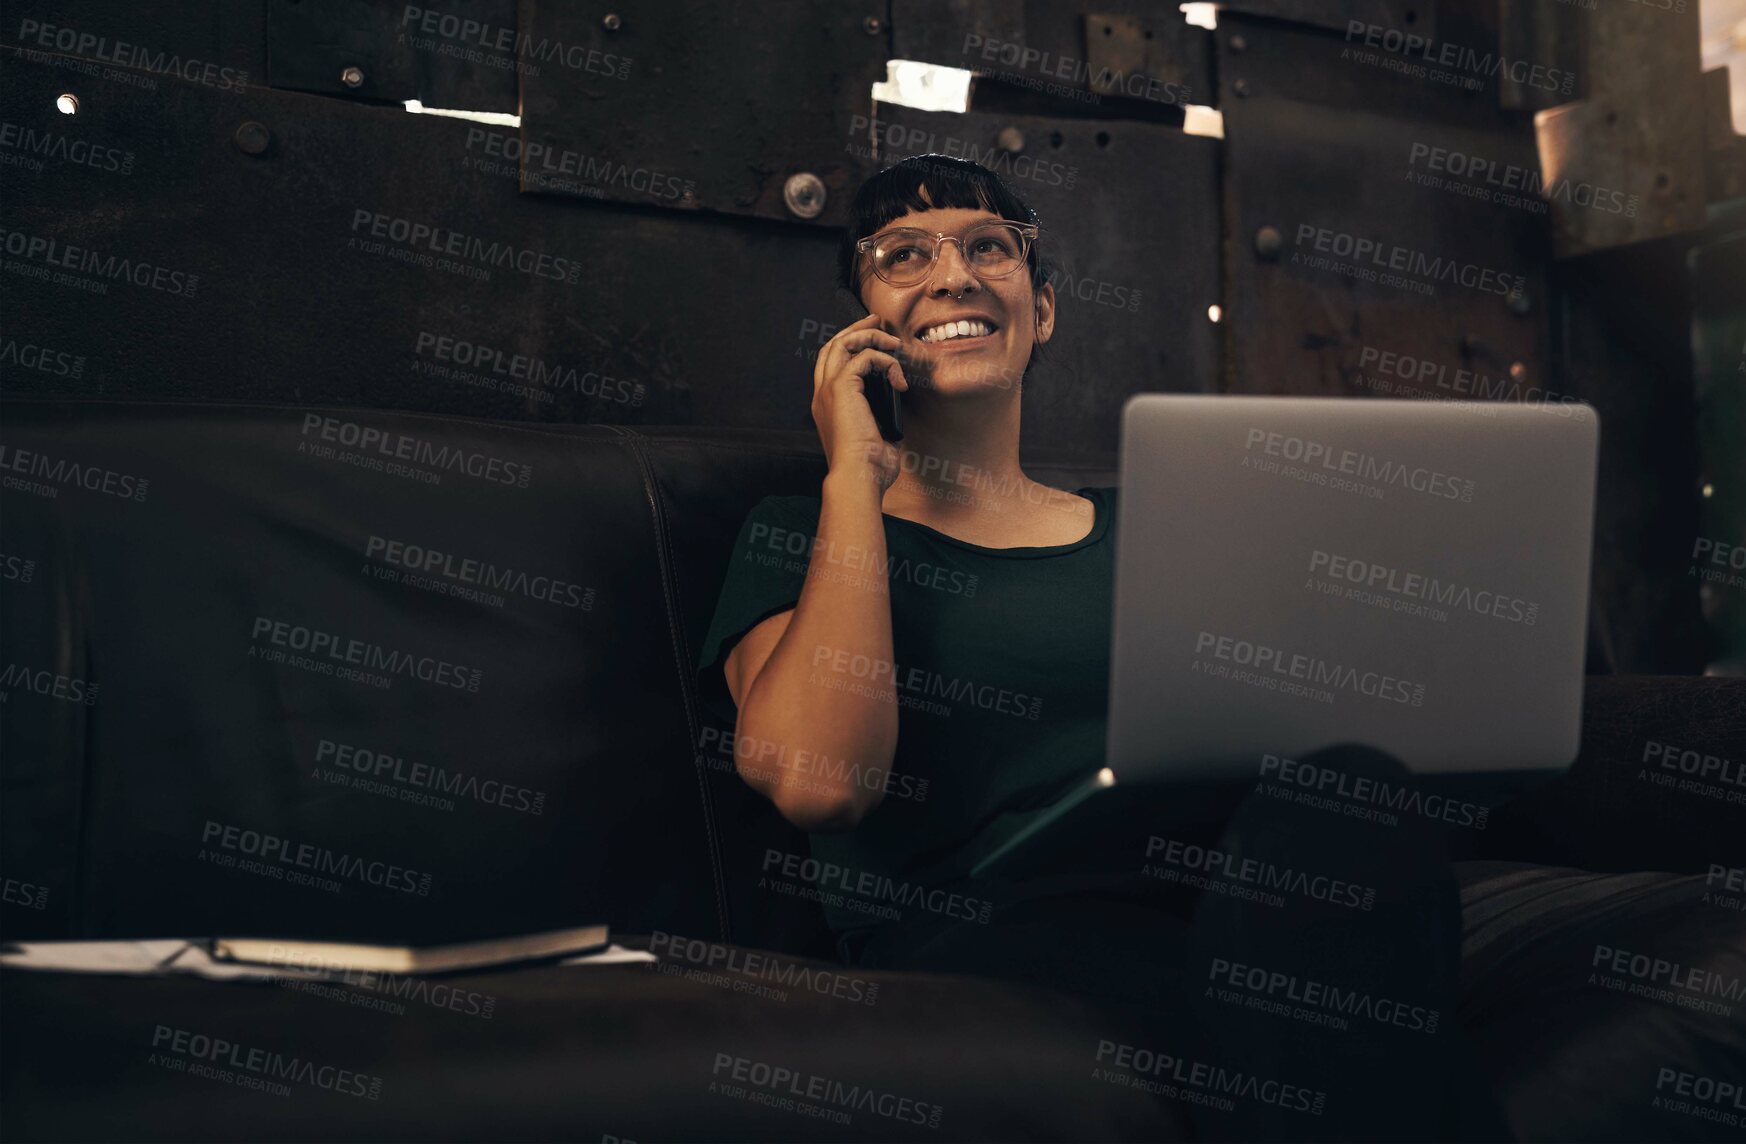 Buy stock photo Shot of a young woman using a laptop and smartphone while working at a foundry